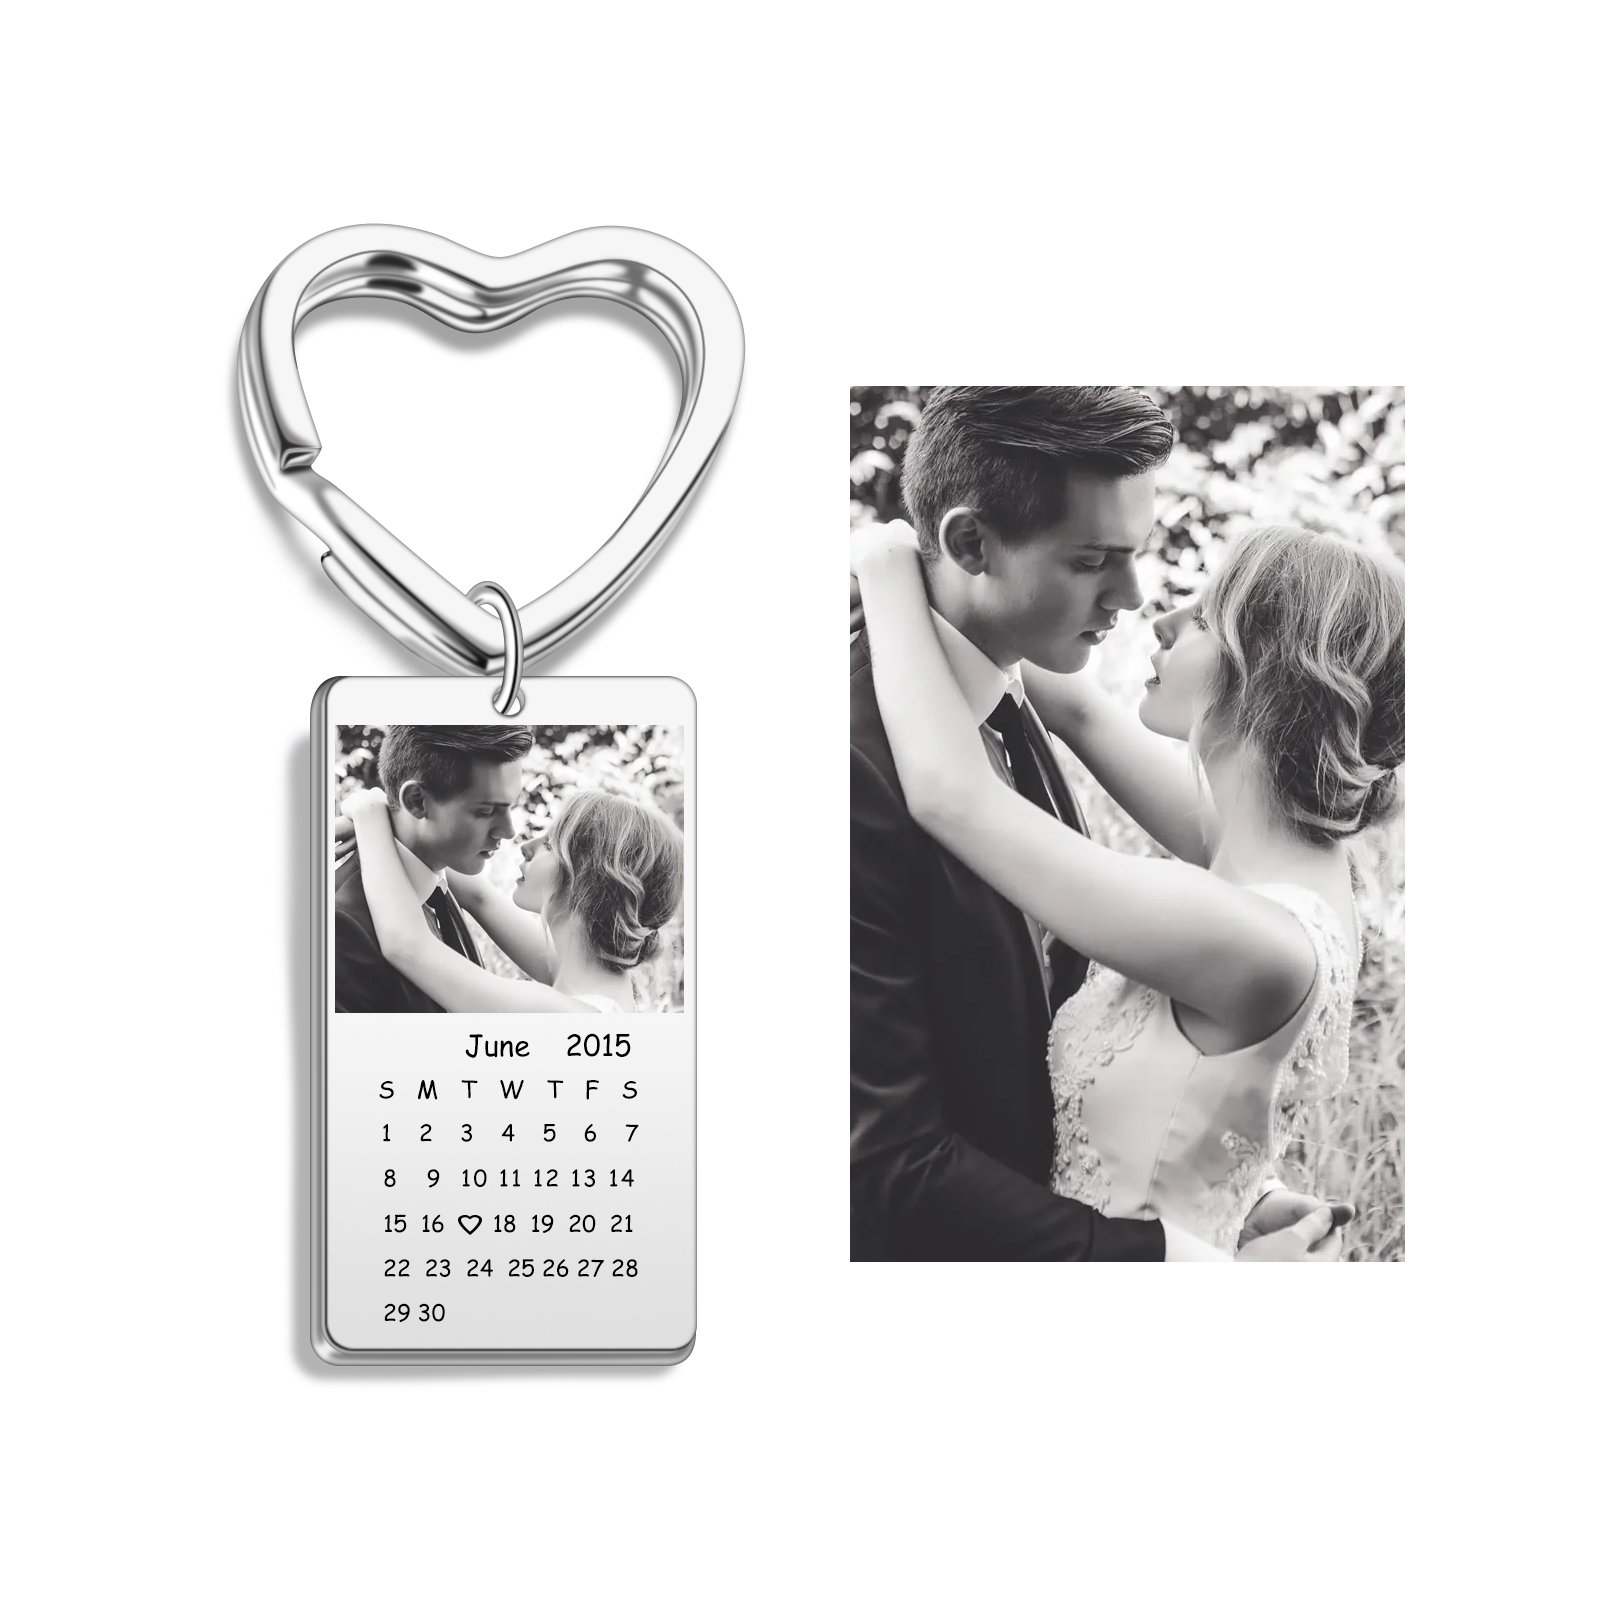 Supports Calendar-Style Birthday Heart KeyChain with Photo Engraved